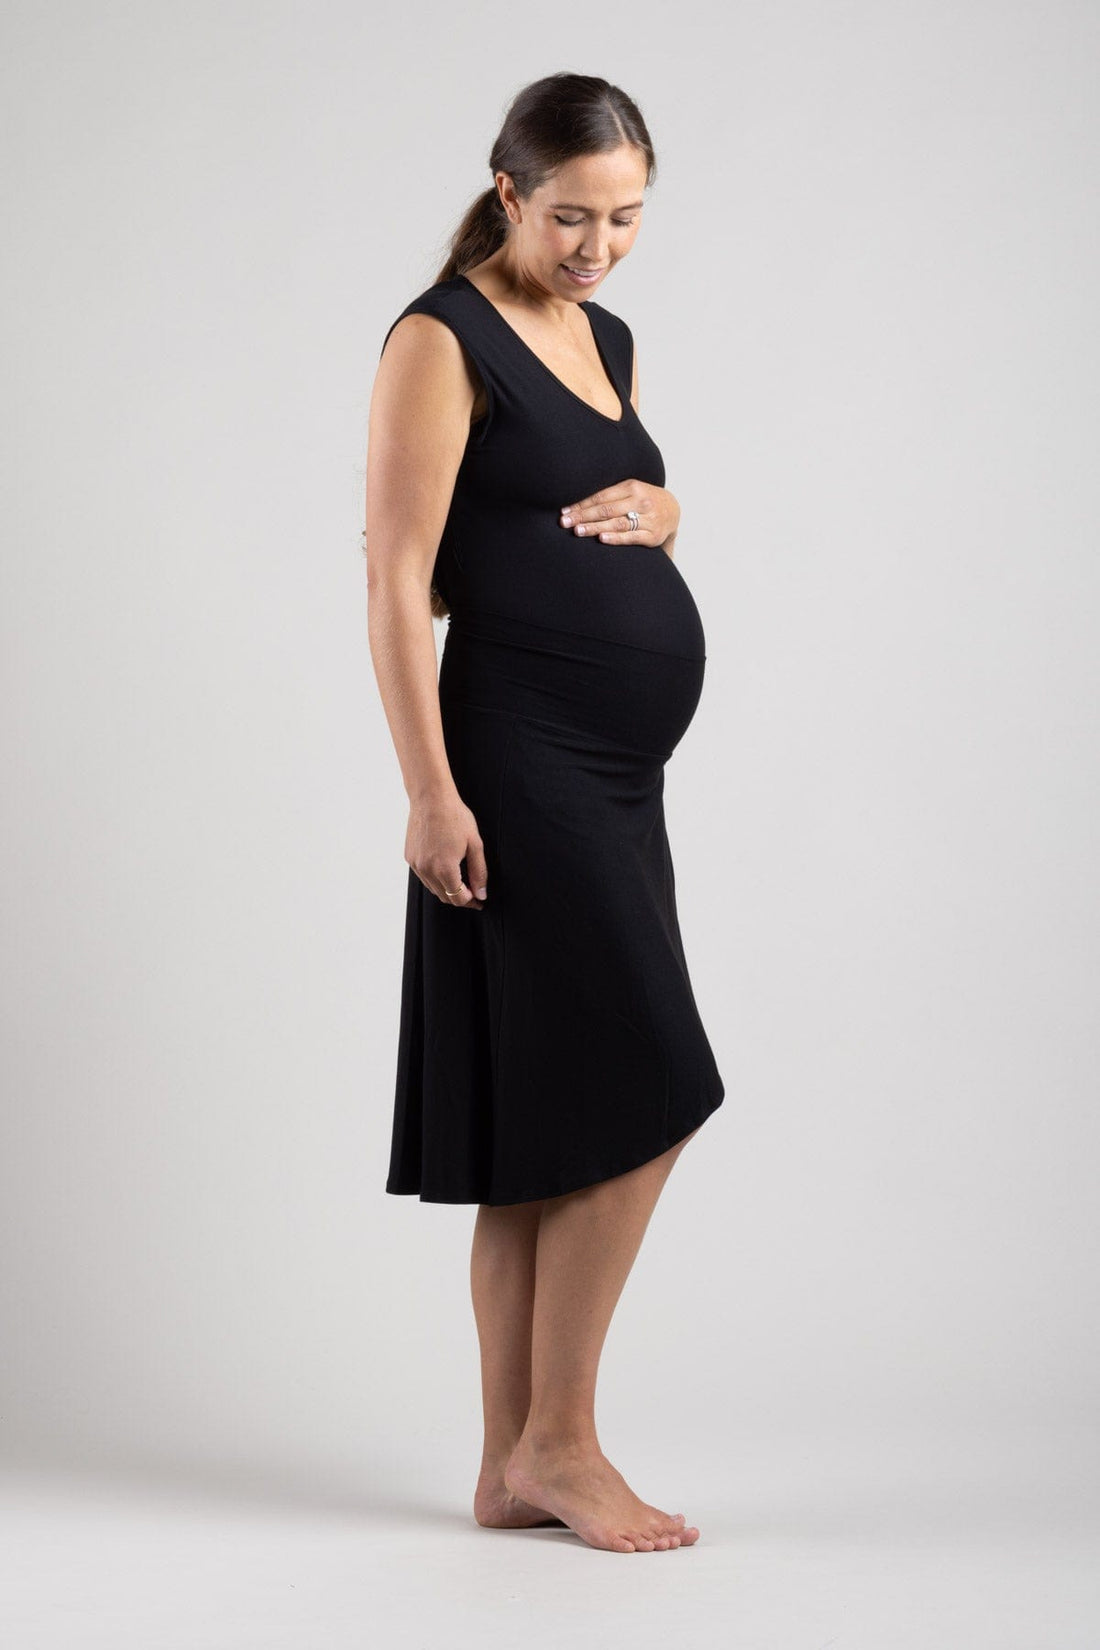 Maacie White Maternity Tennis Skirts Quick-Dry Sports A-Line Skirt wit –  Maacie Maternity